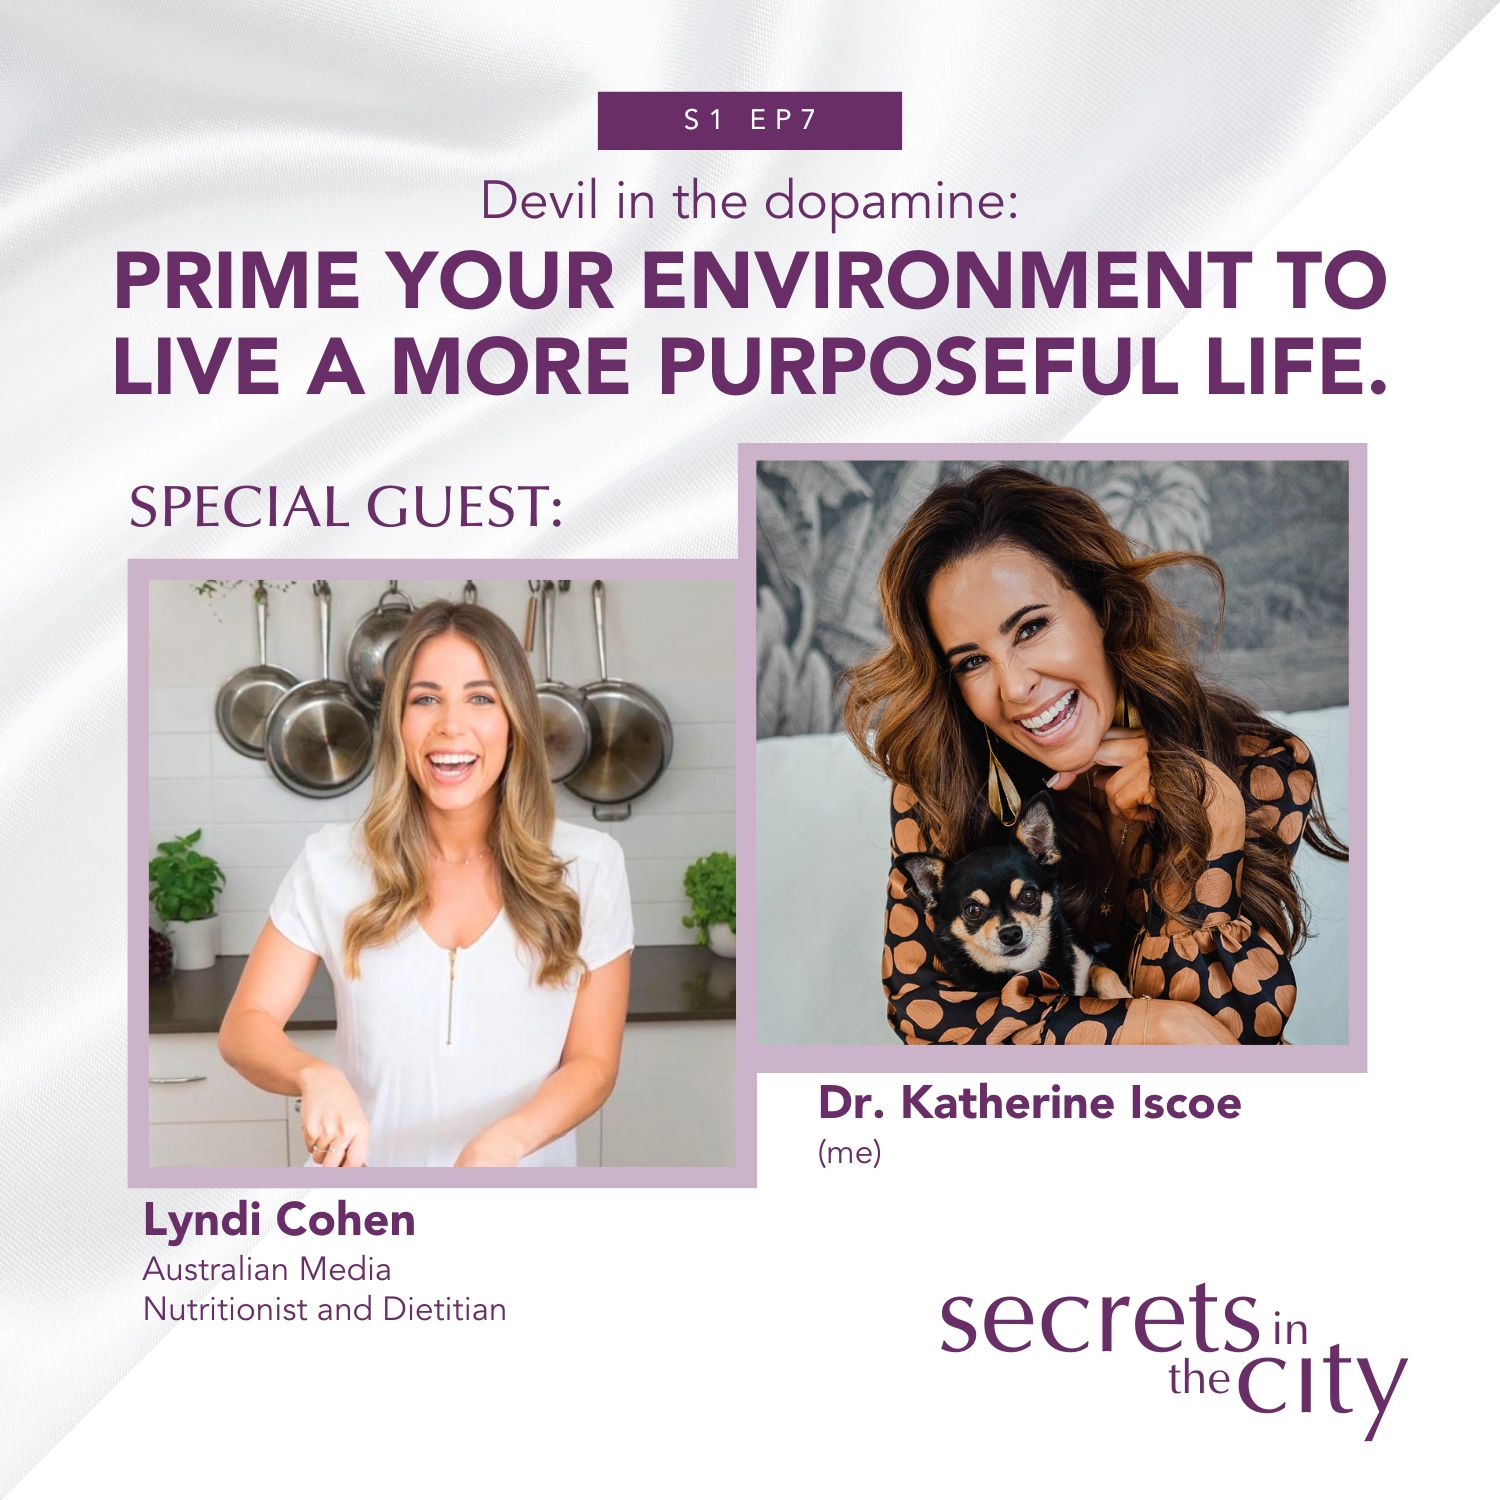 Devil in the Dopamine - Secrets in the City podcast cover featuring photos of Lyndi Cohen and Dr. Katherine Iscoe